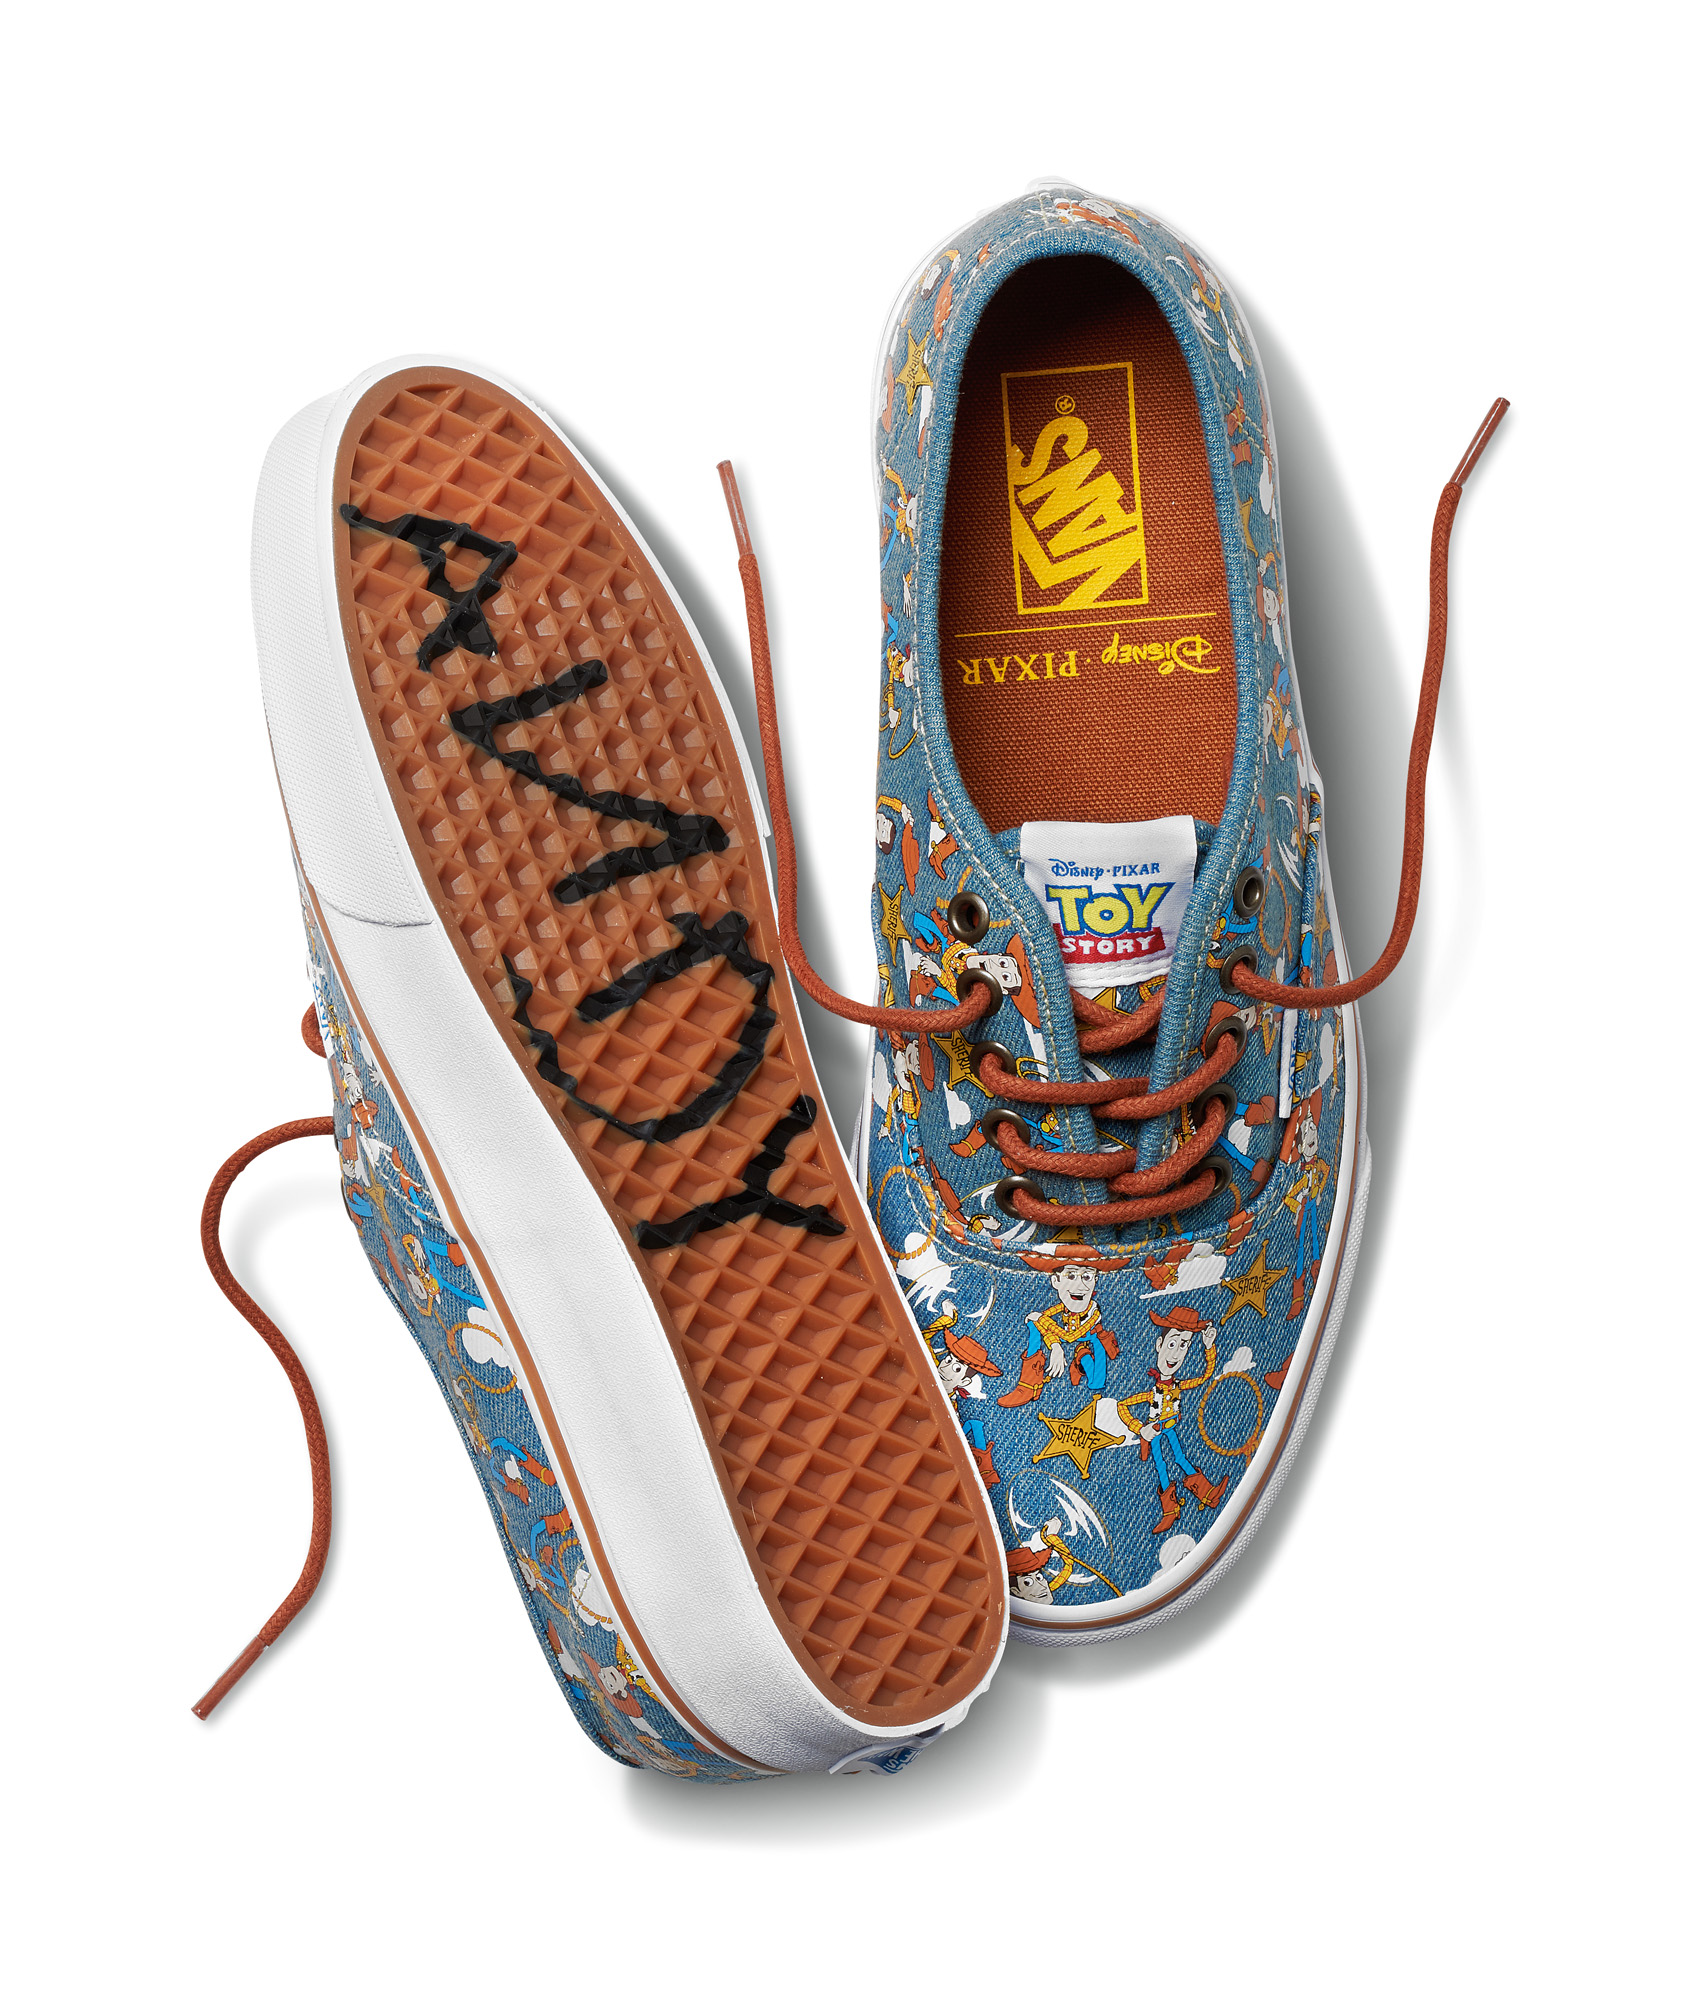 baskets vans toy story